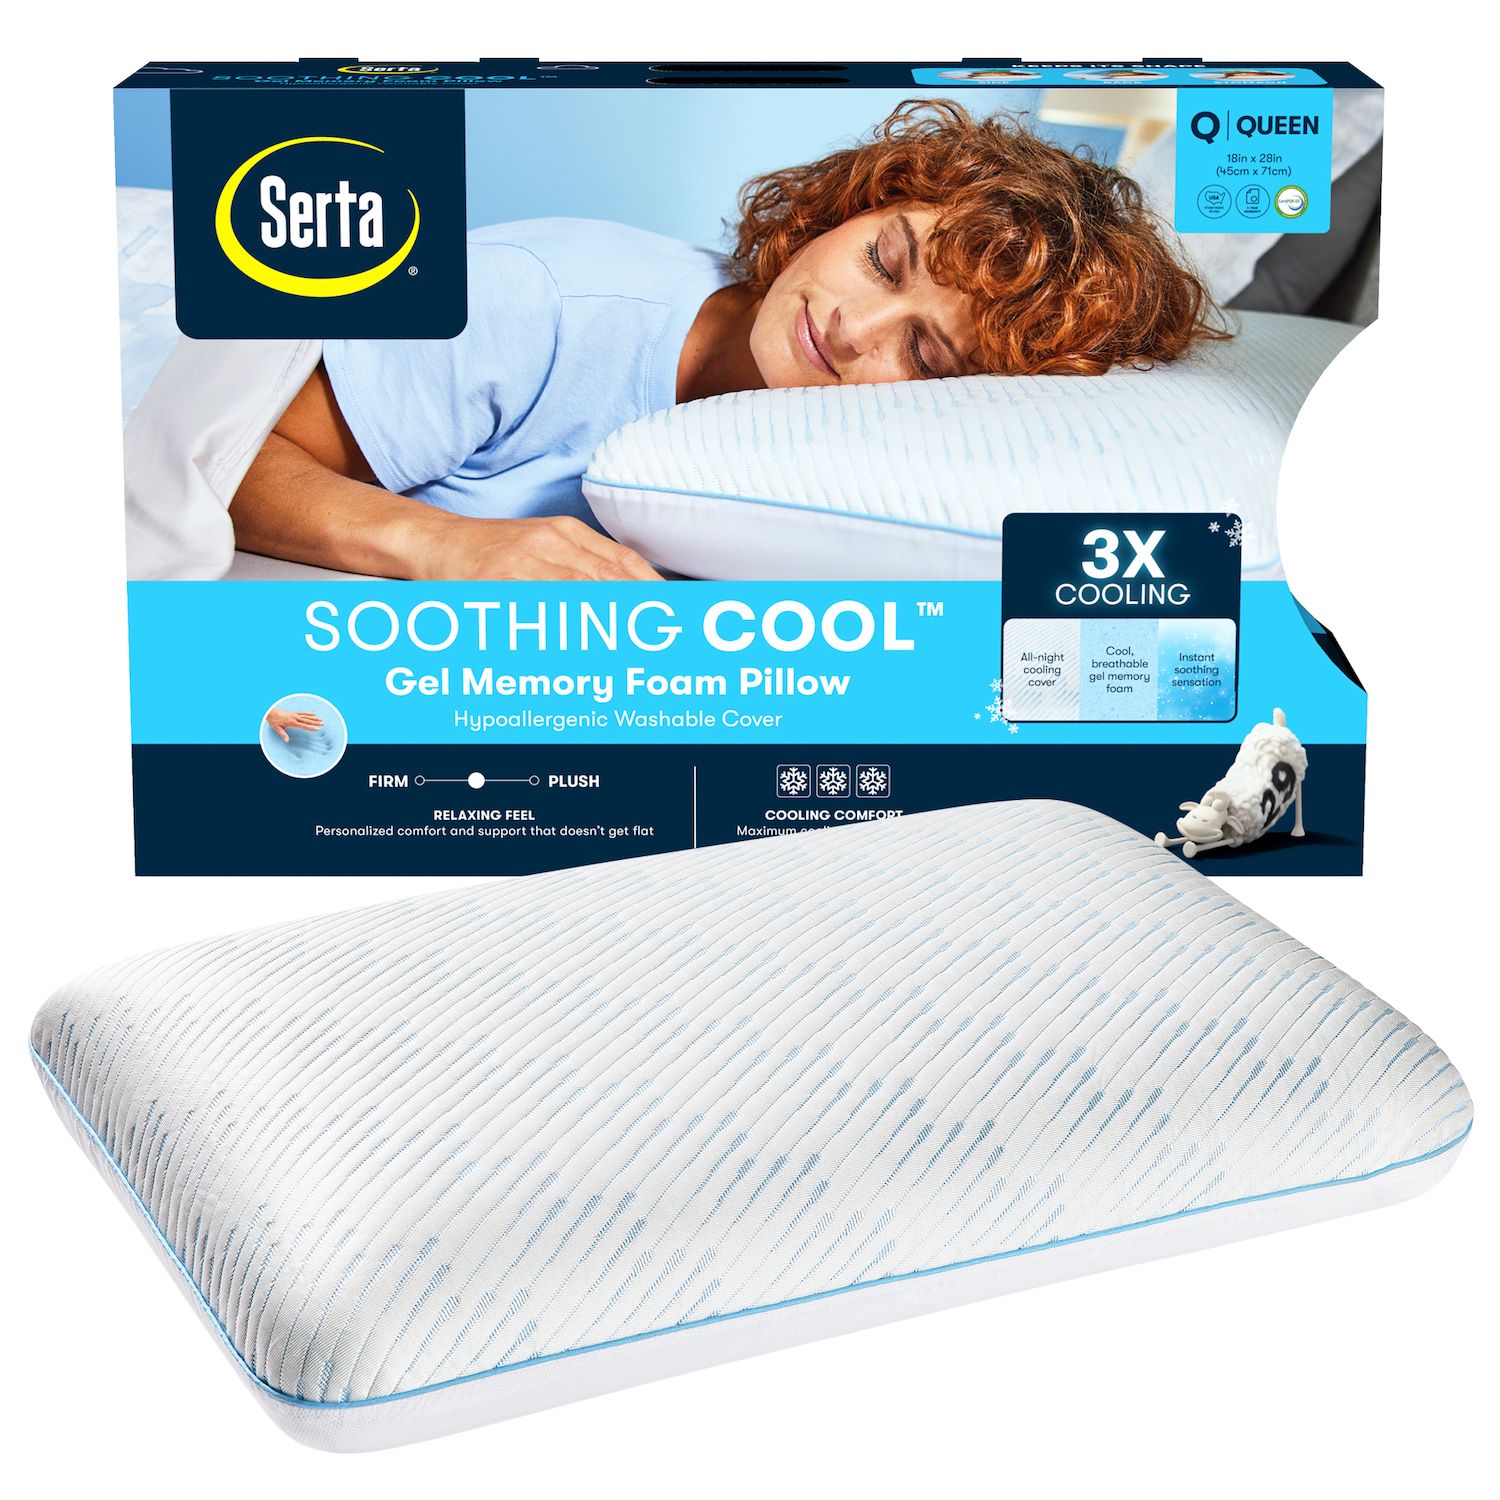 Sealy Elite Cool Touch Advanced Cooling Bed Pillow Queen